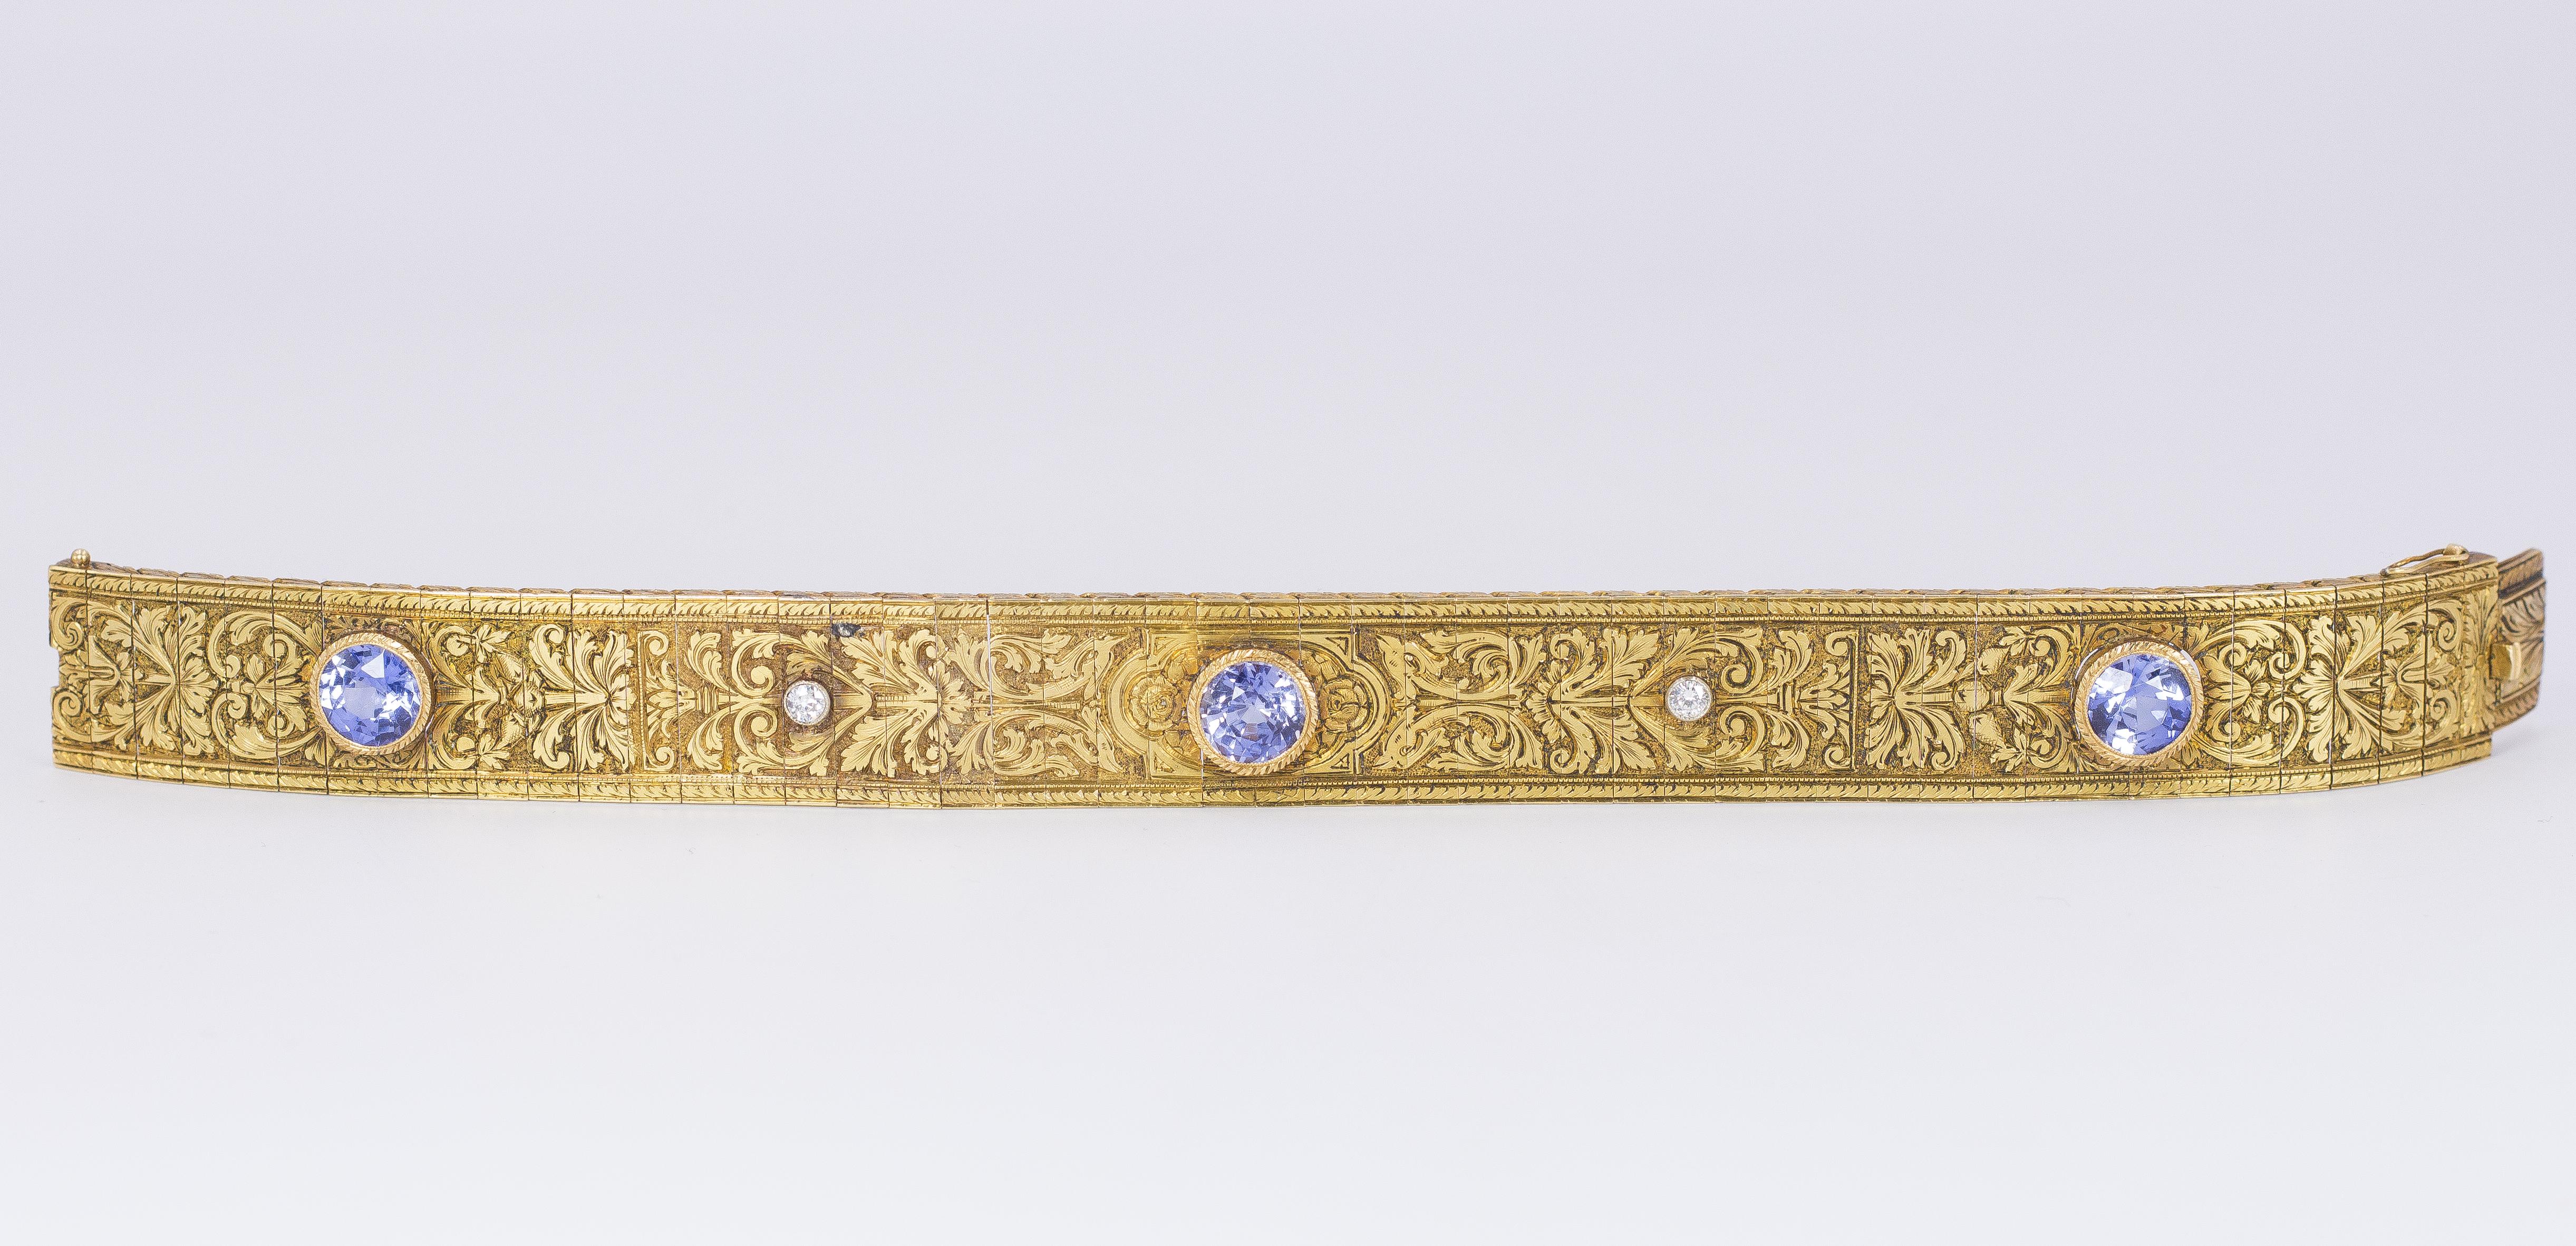 Antique 18 Karat Gold, Sapphire and Diamond Cuff Bangle, Early 20th Century For Sale 1